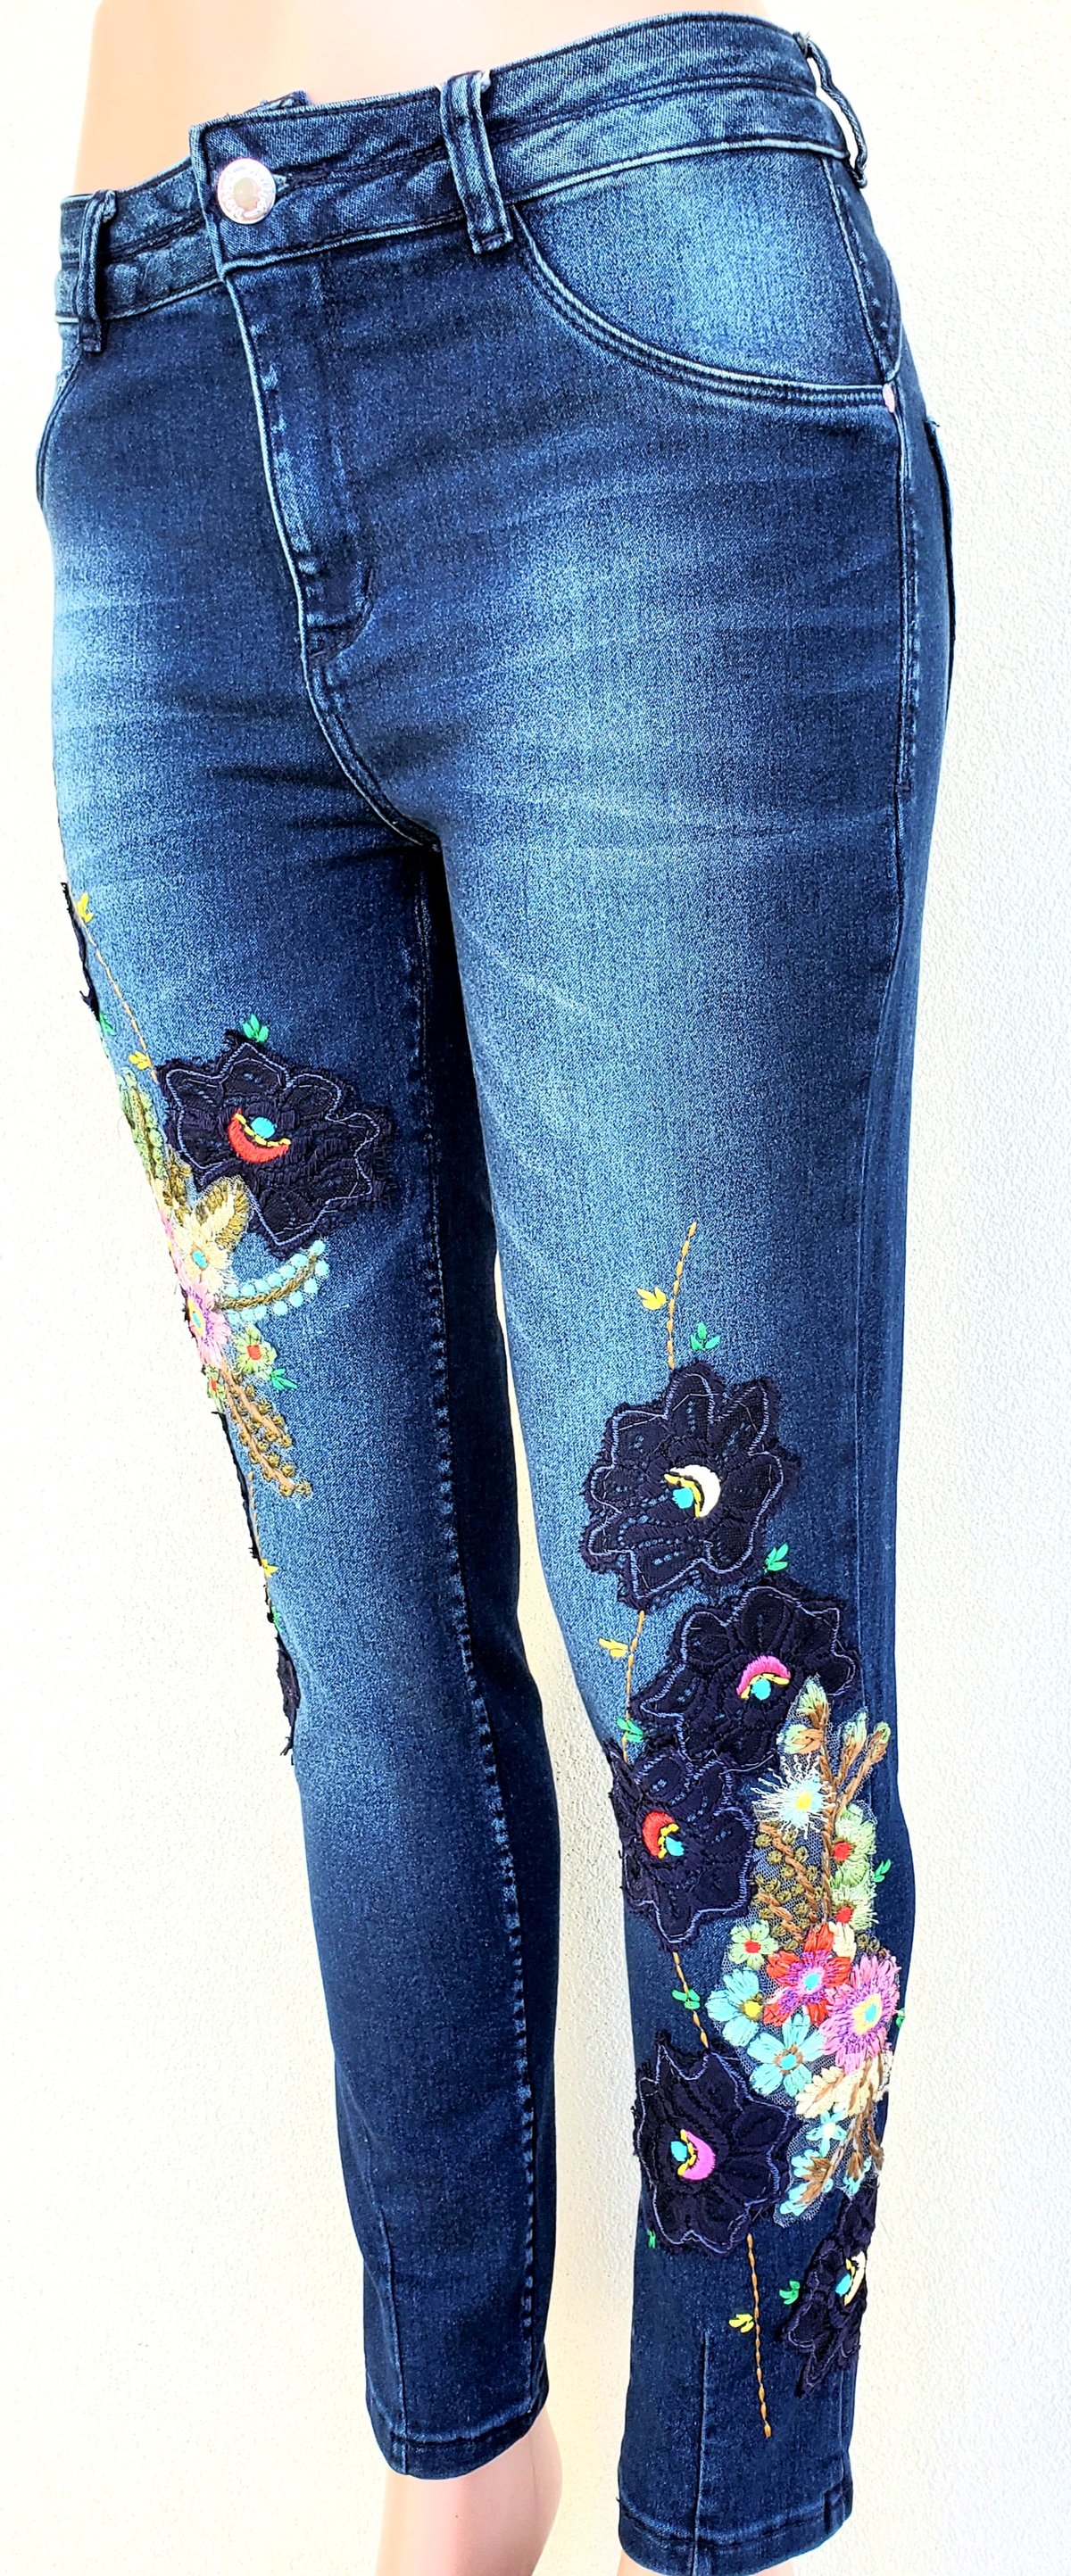 Blue jeans lace embroidery BR336